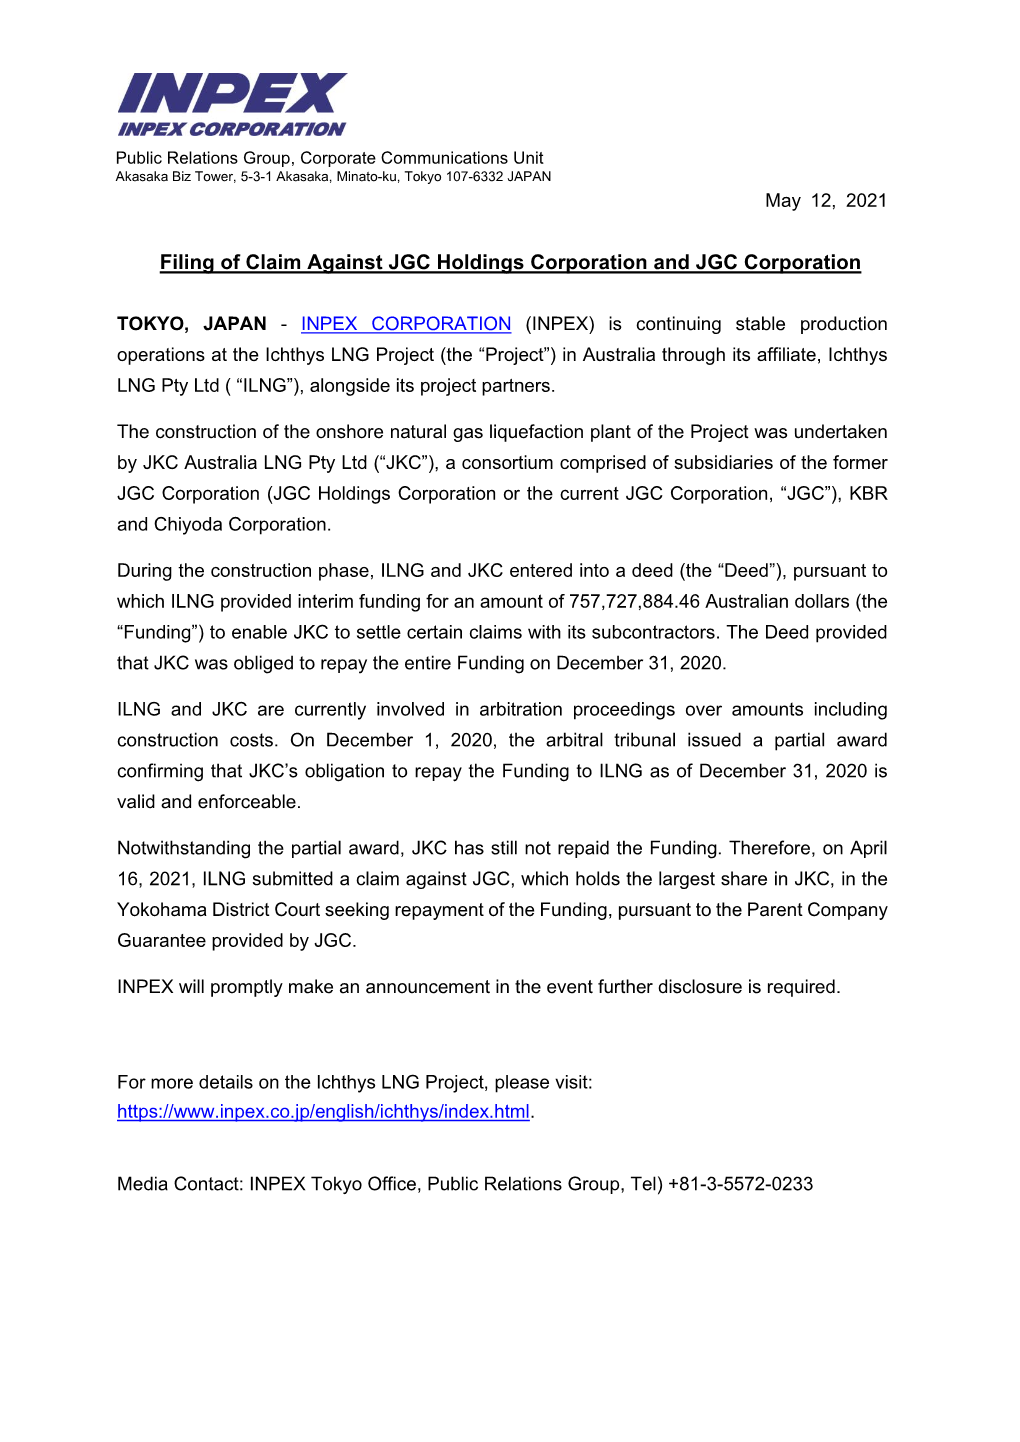 May 12, 2021 Filing of Claim Against JGC Holdings Corporation and JGC